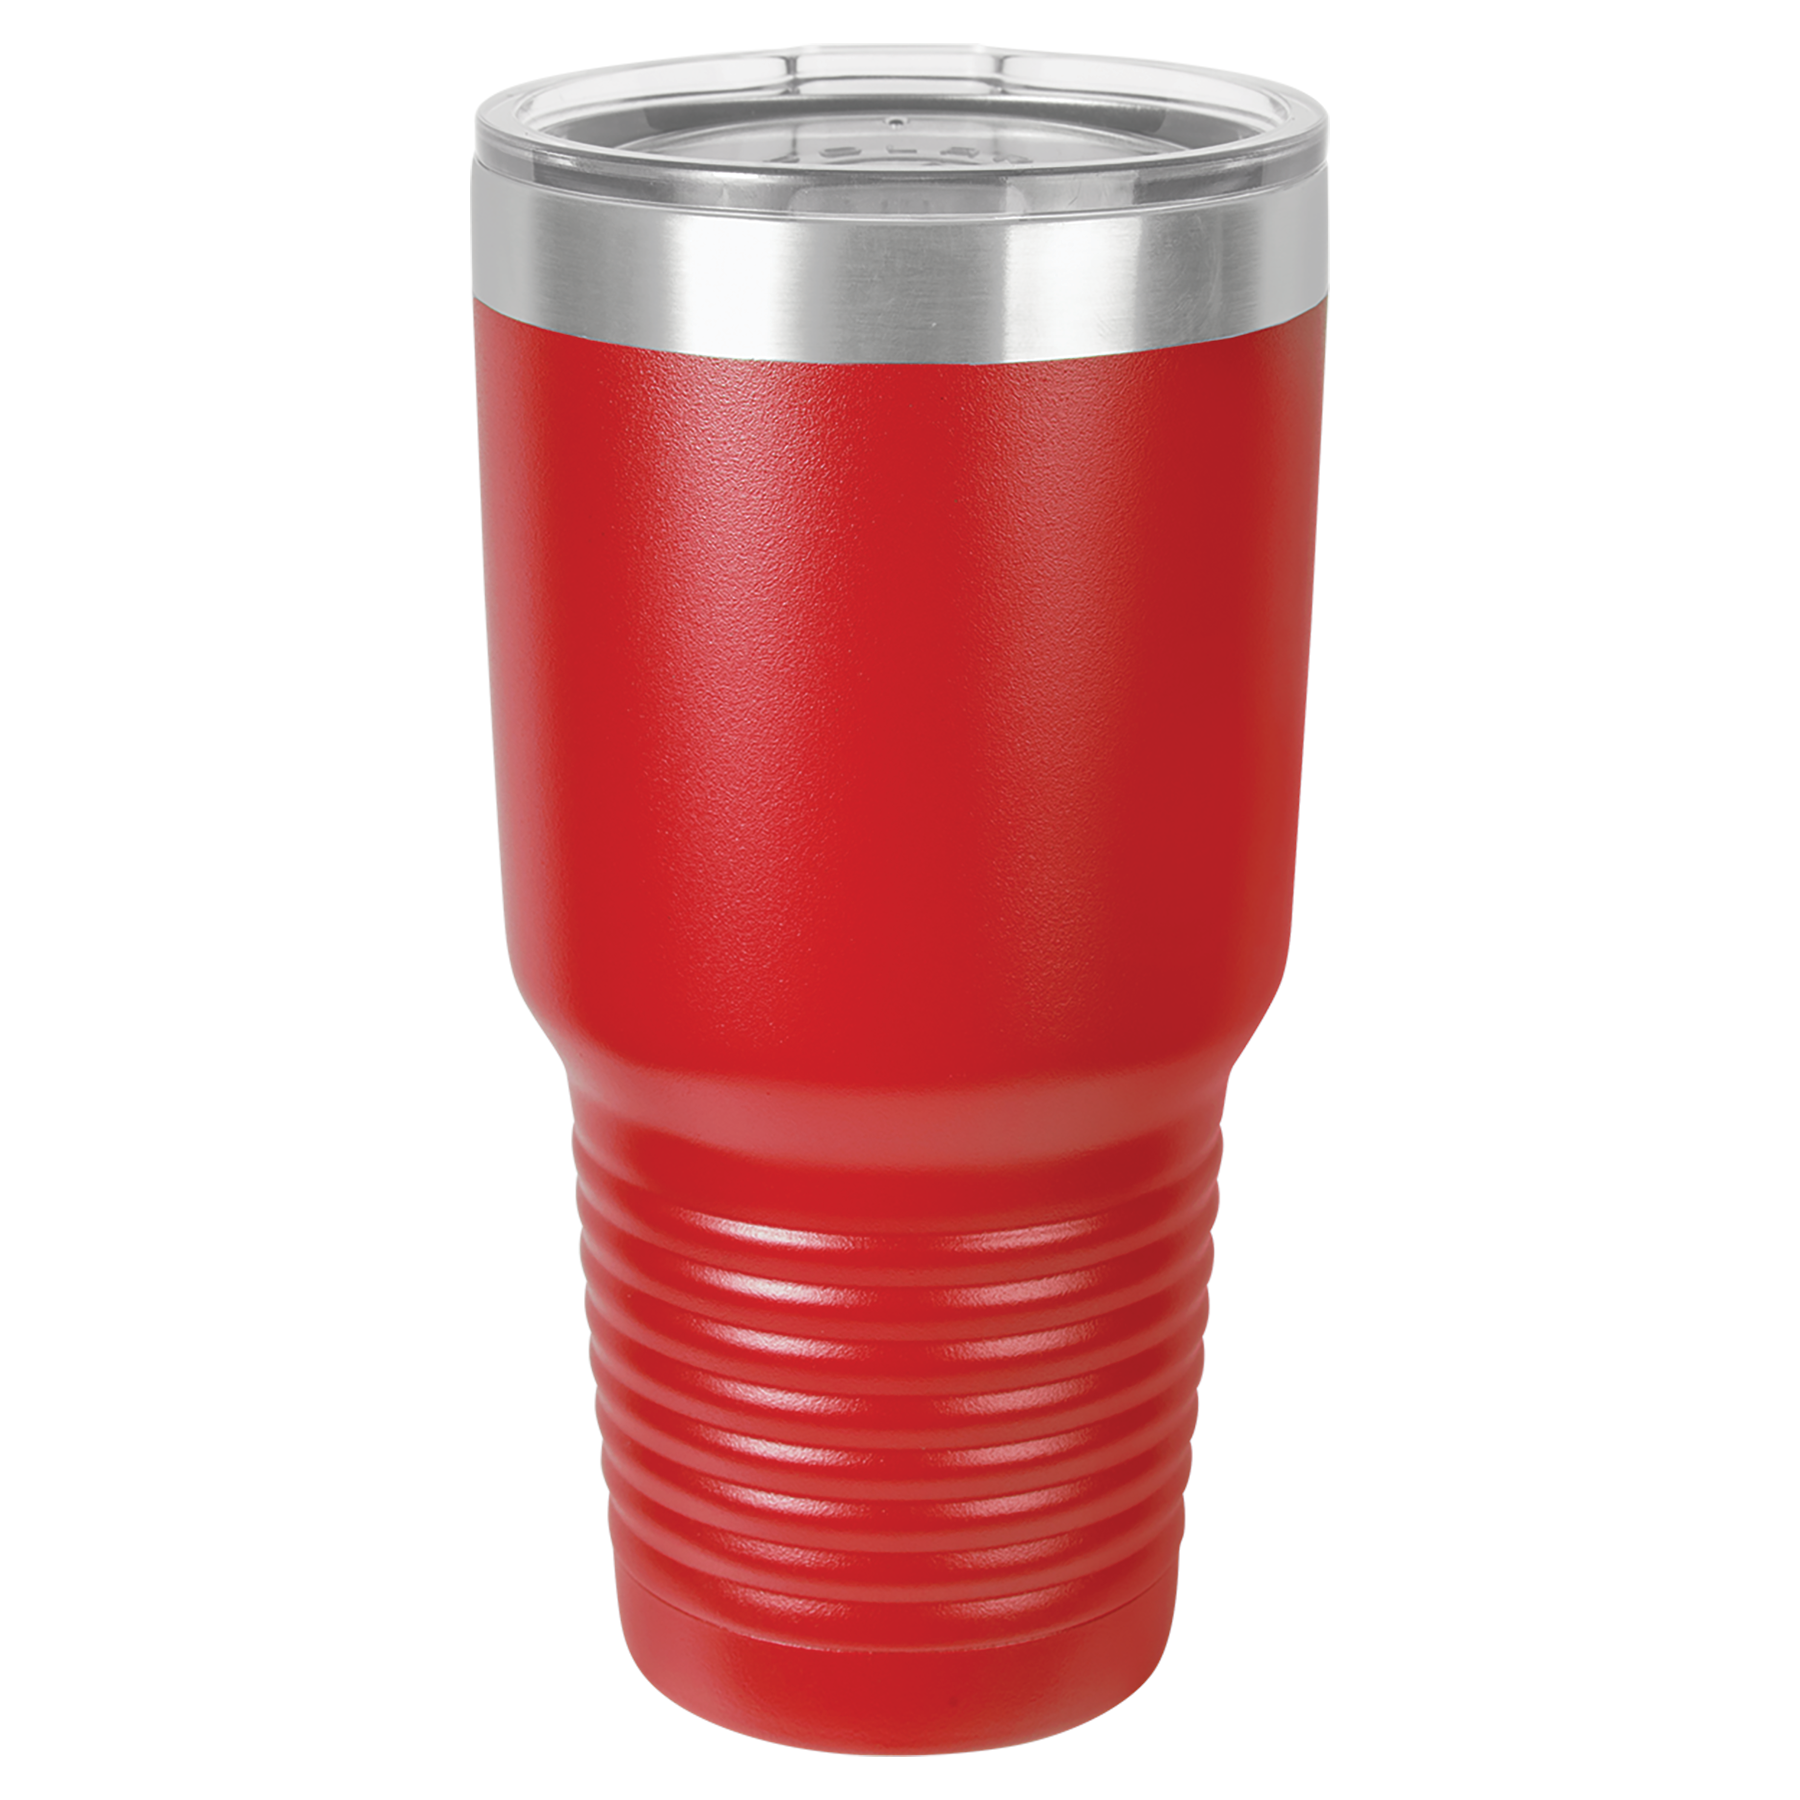 Red 30oz Tumbler -One Free Engraving -Fits most Cup Holders -Double-wall Vacuum Insulated -Made from 18/8 Gauge Stainless Steel (Type 304 Food Grade) -Lid is BPA Free (Hand Wash Only) -Dishwasher Safe -Works with Cold and Hot Drinks -19 Color Options -Perfect for Personalized Gifts, Awards, Incentives, Swag & Fundraisers